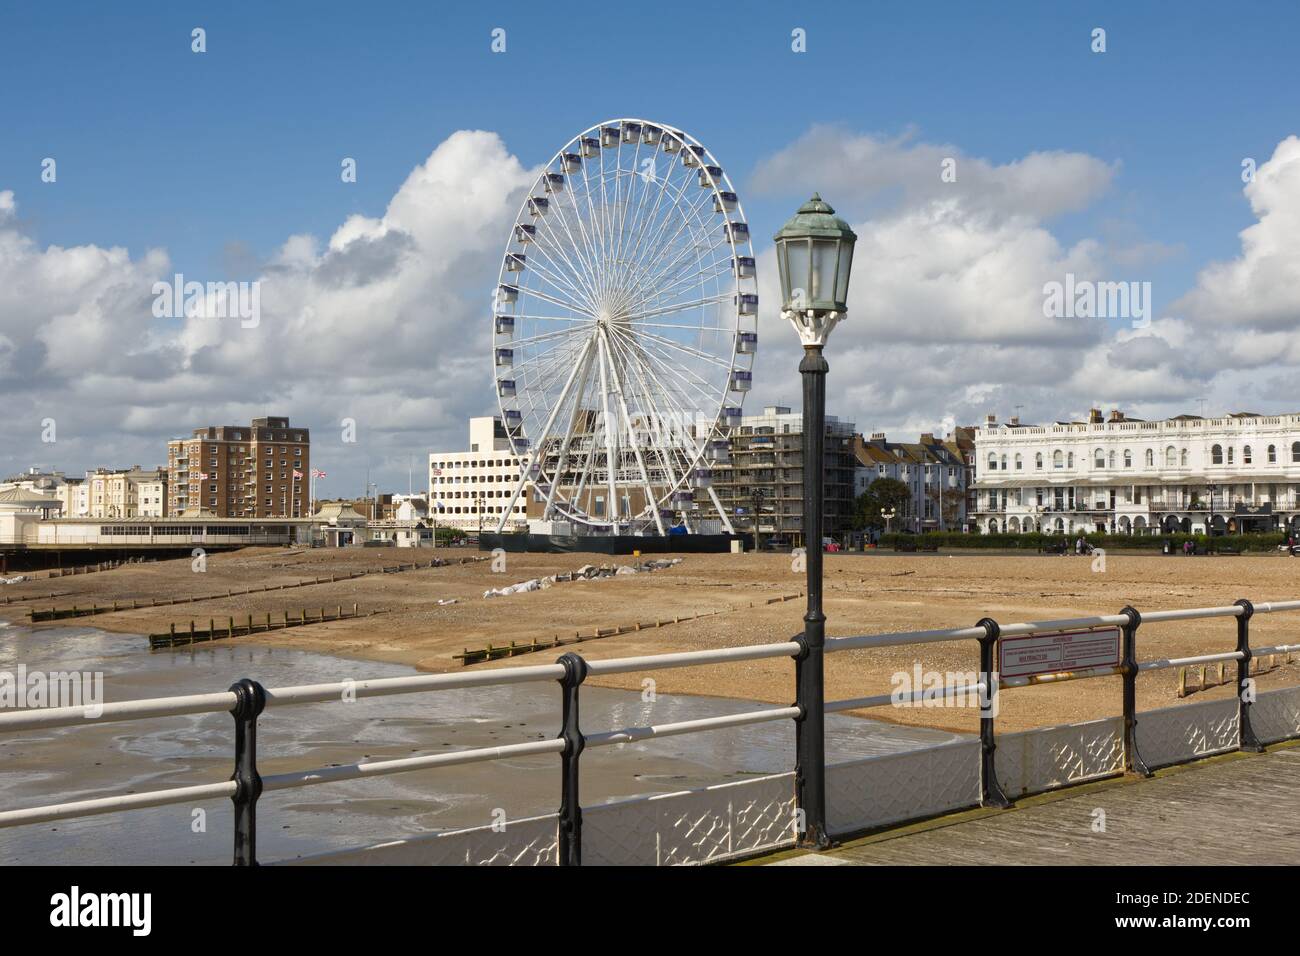 Seafront and beach at Worthing, West Sussex, England. With Ferris wheel viewed from pier. Stock Photo